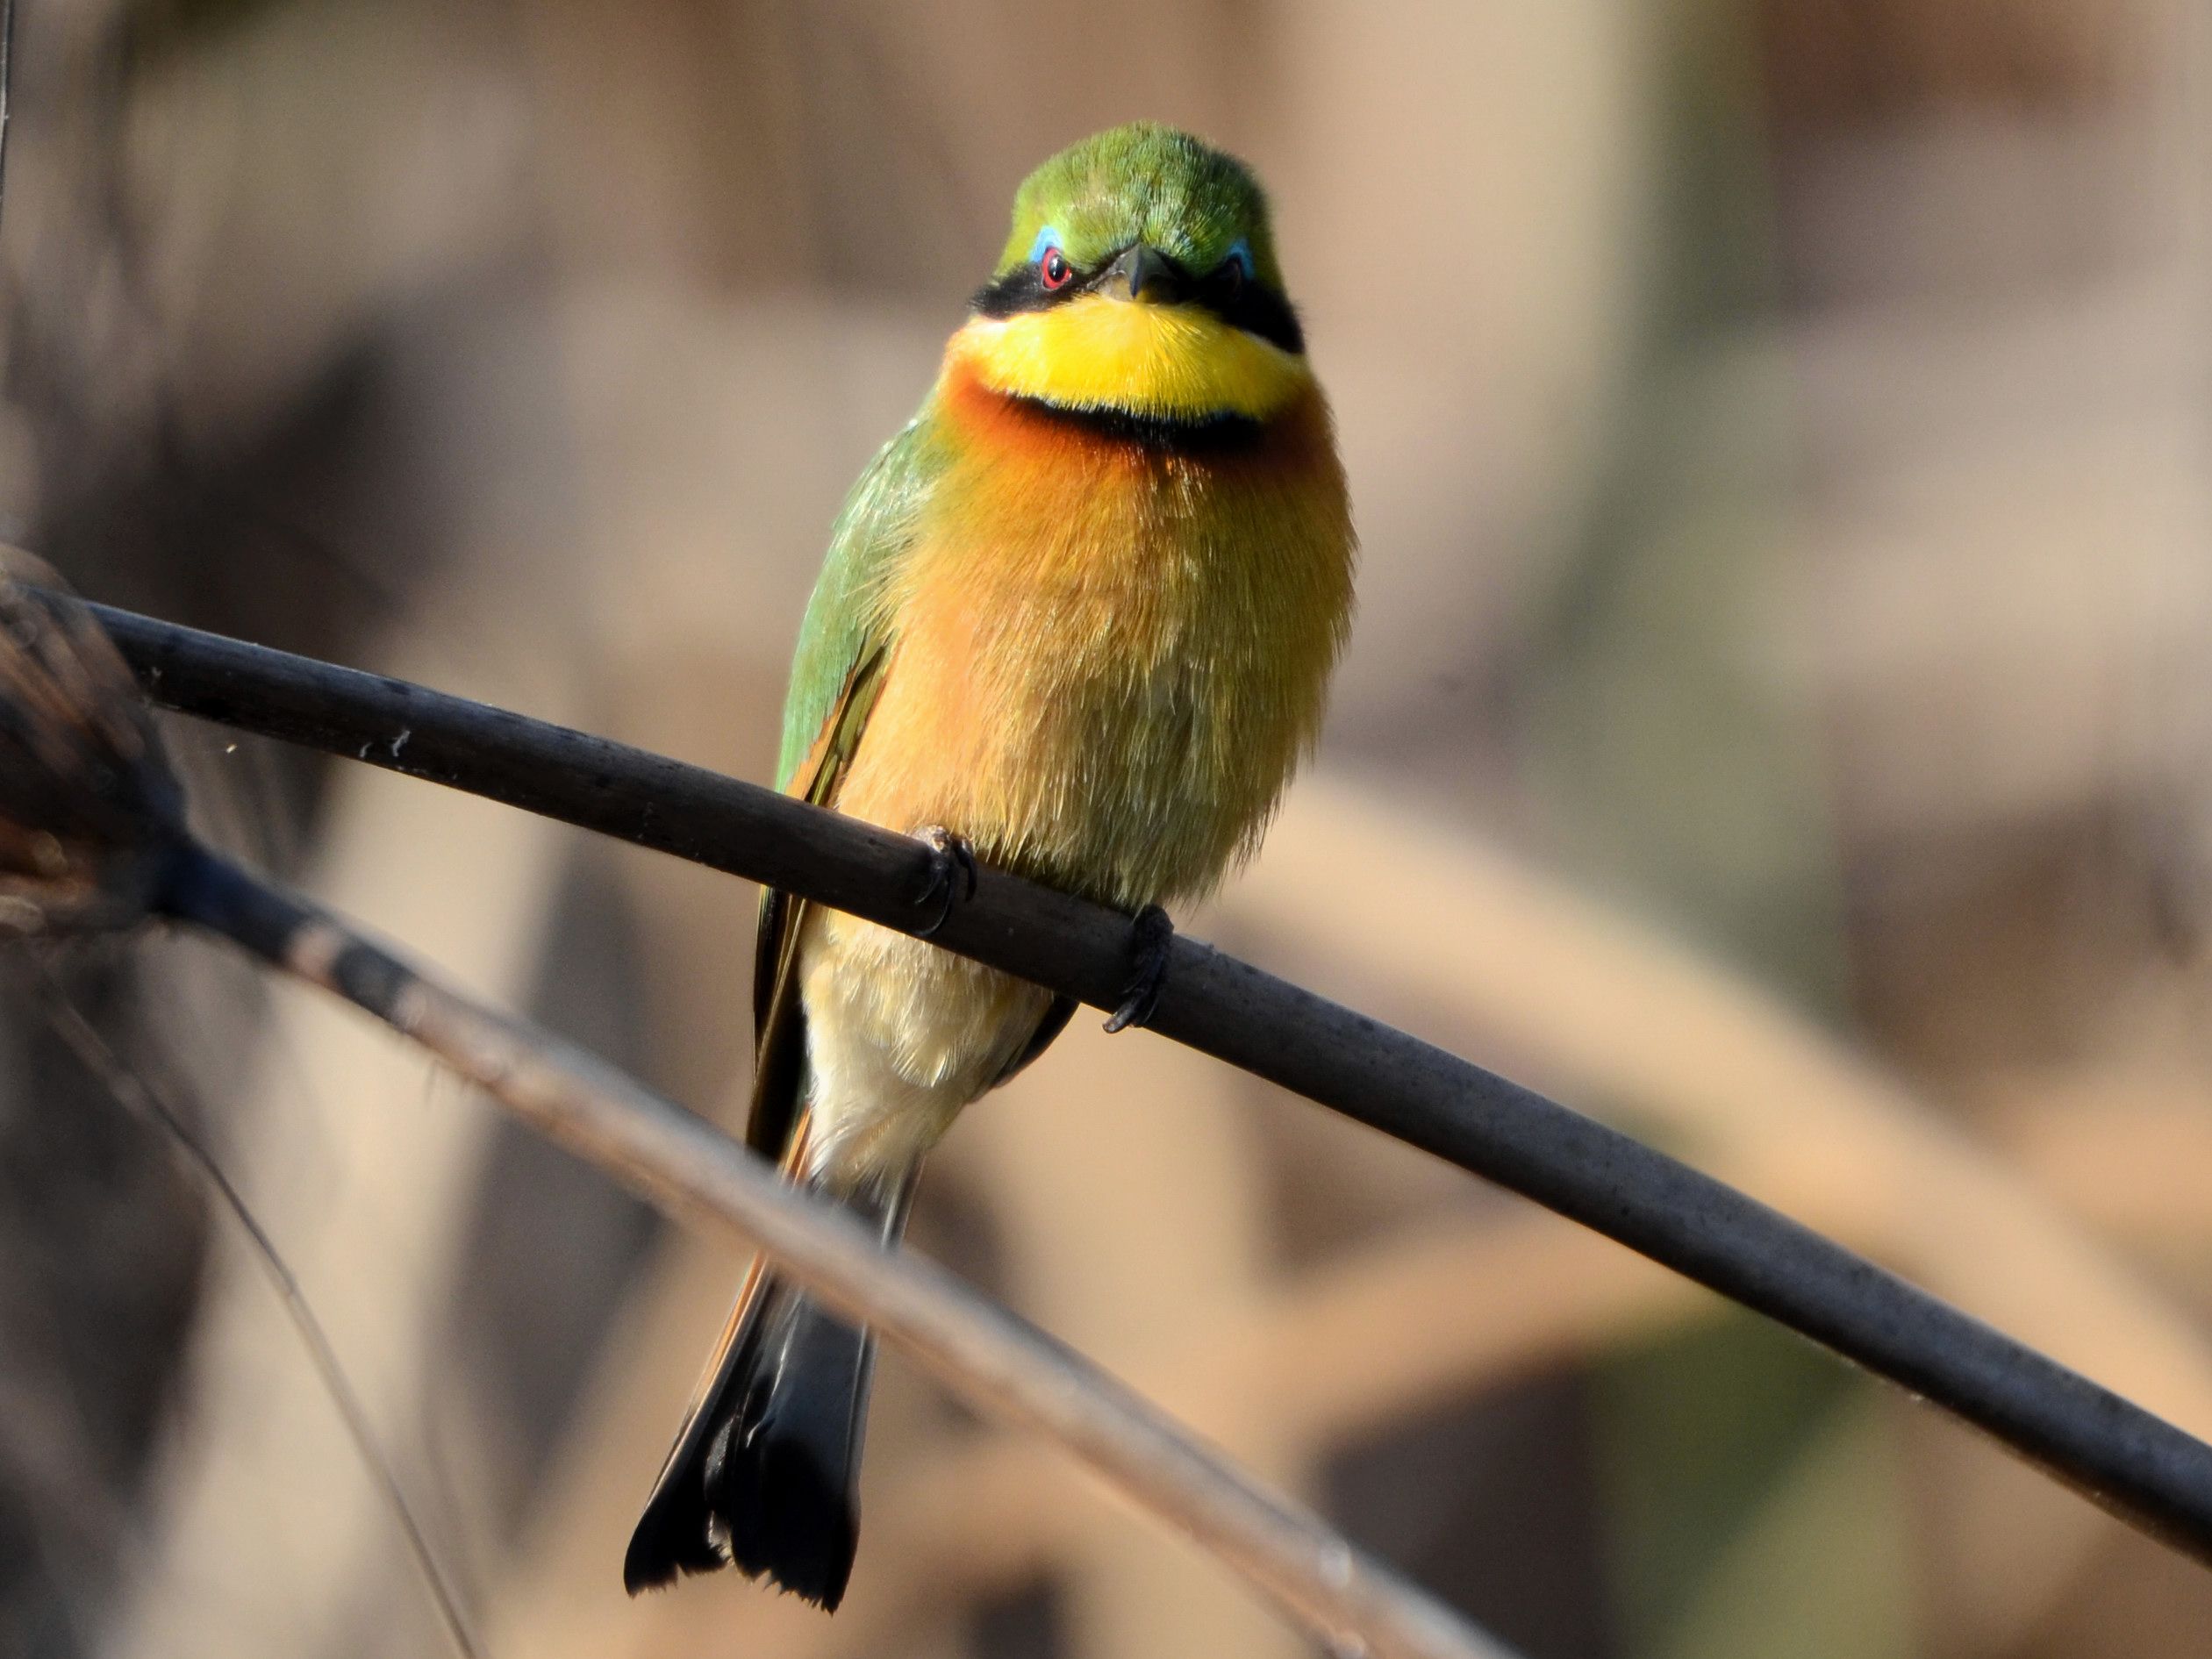 Click picture to see more Little Bee-eaters.